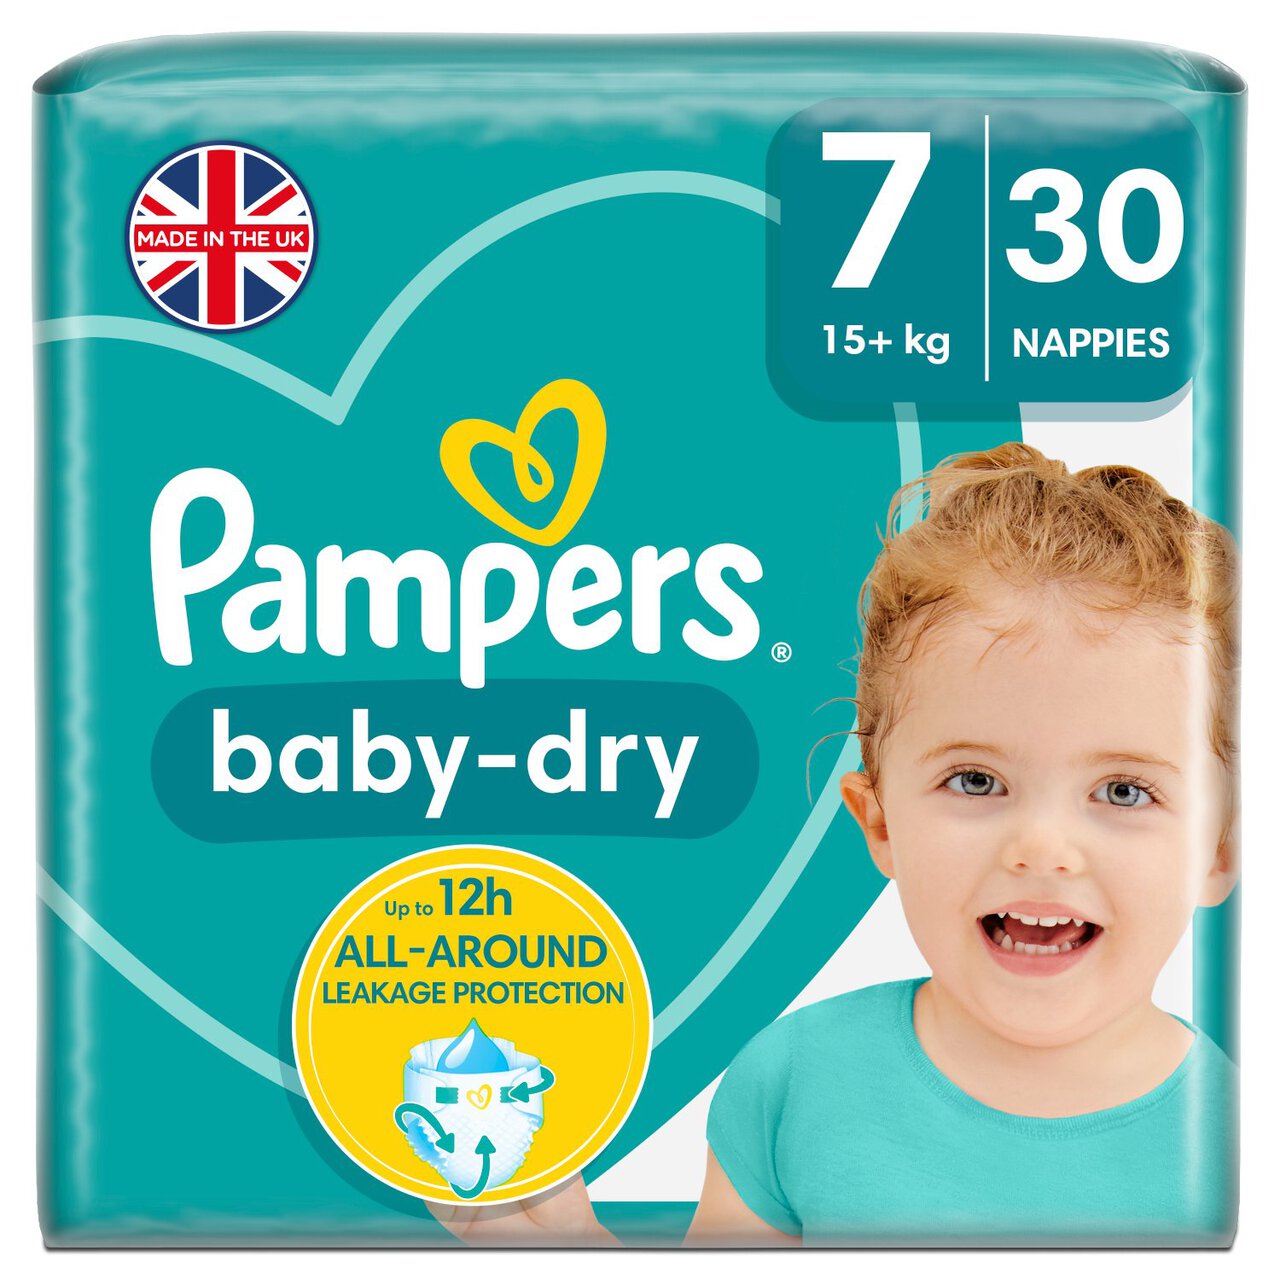 Pampers Baby-Dry Nappies, Size 7 (15kg+) Essential Pack 30 per pack